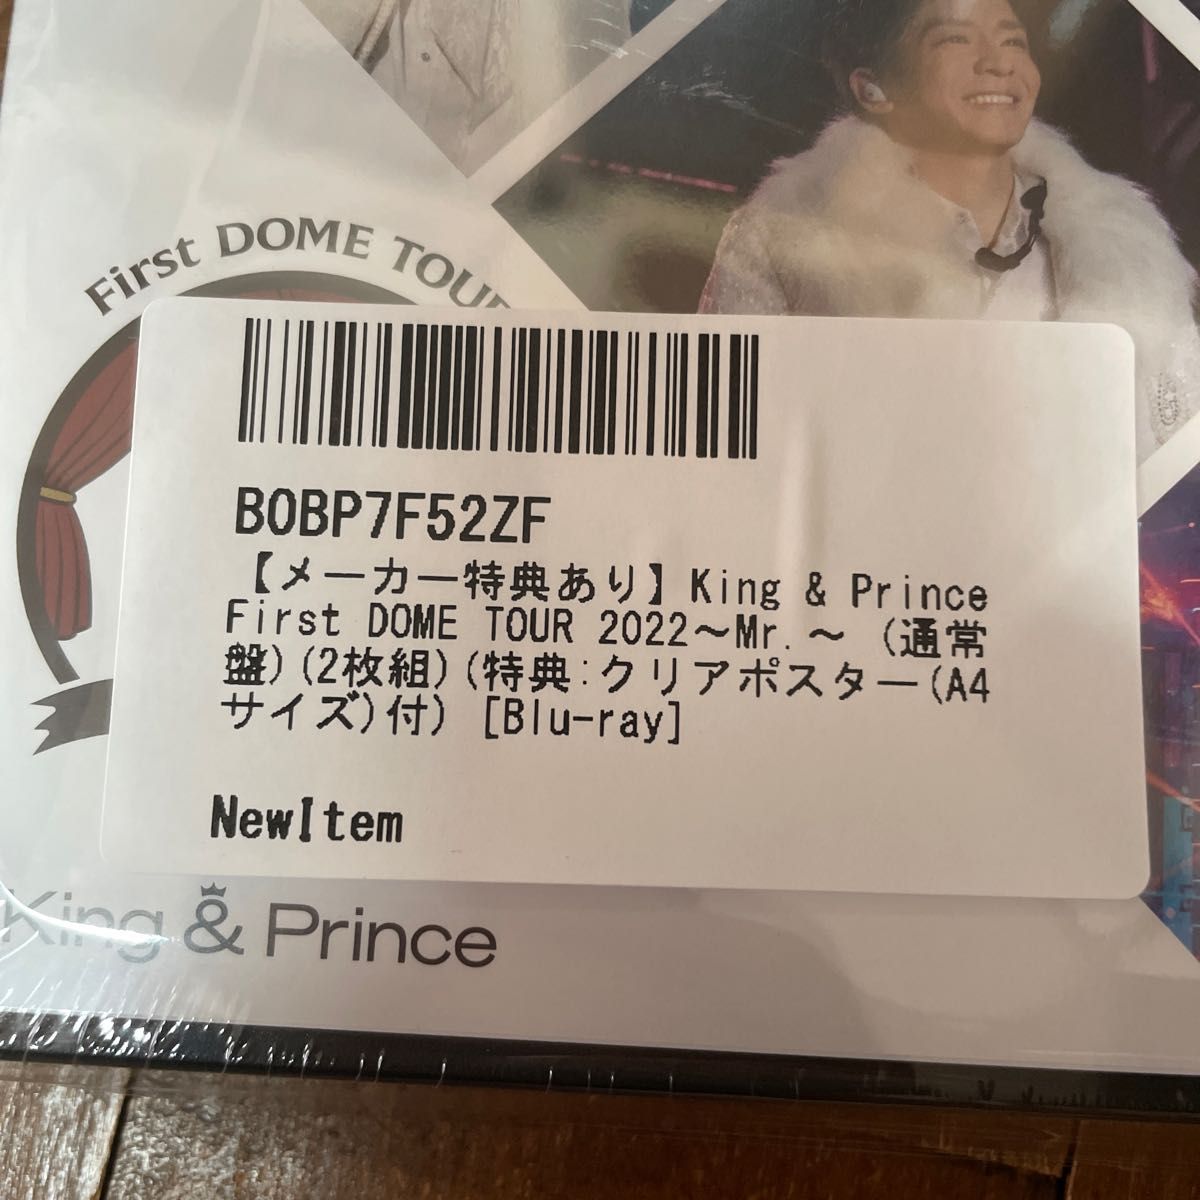 King & Prince First DOME TOUR 2022 〜Mr.〜 通常盤(特典:クリアポスター付) Blu-ray